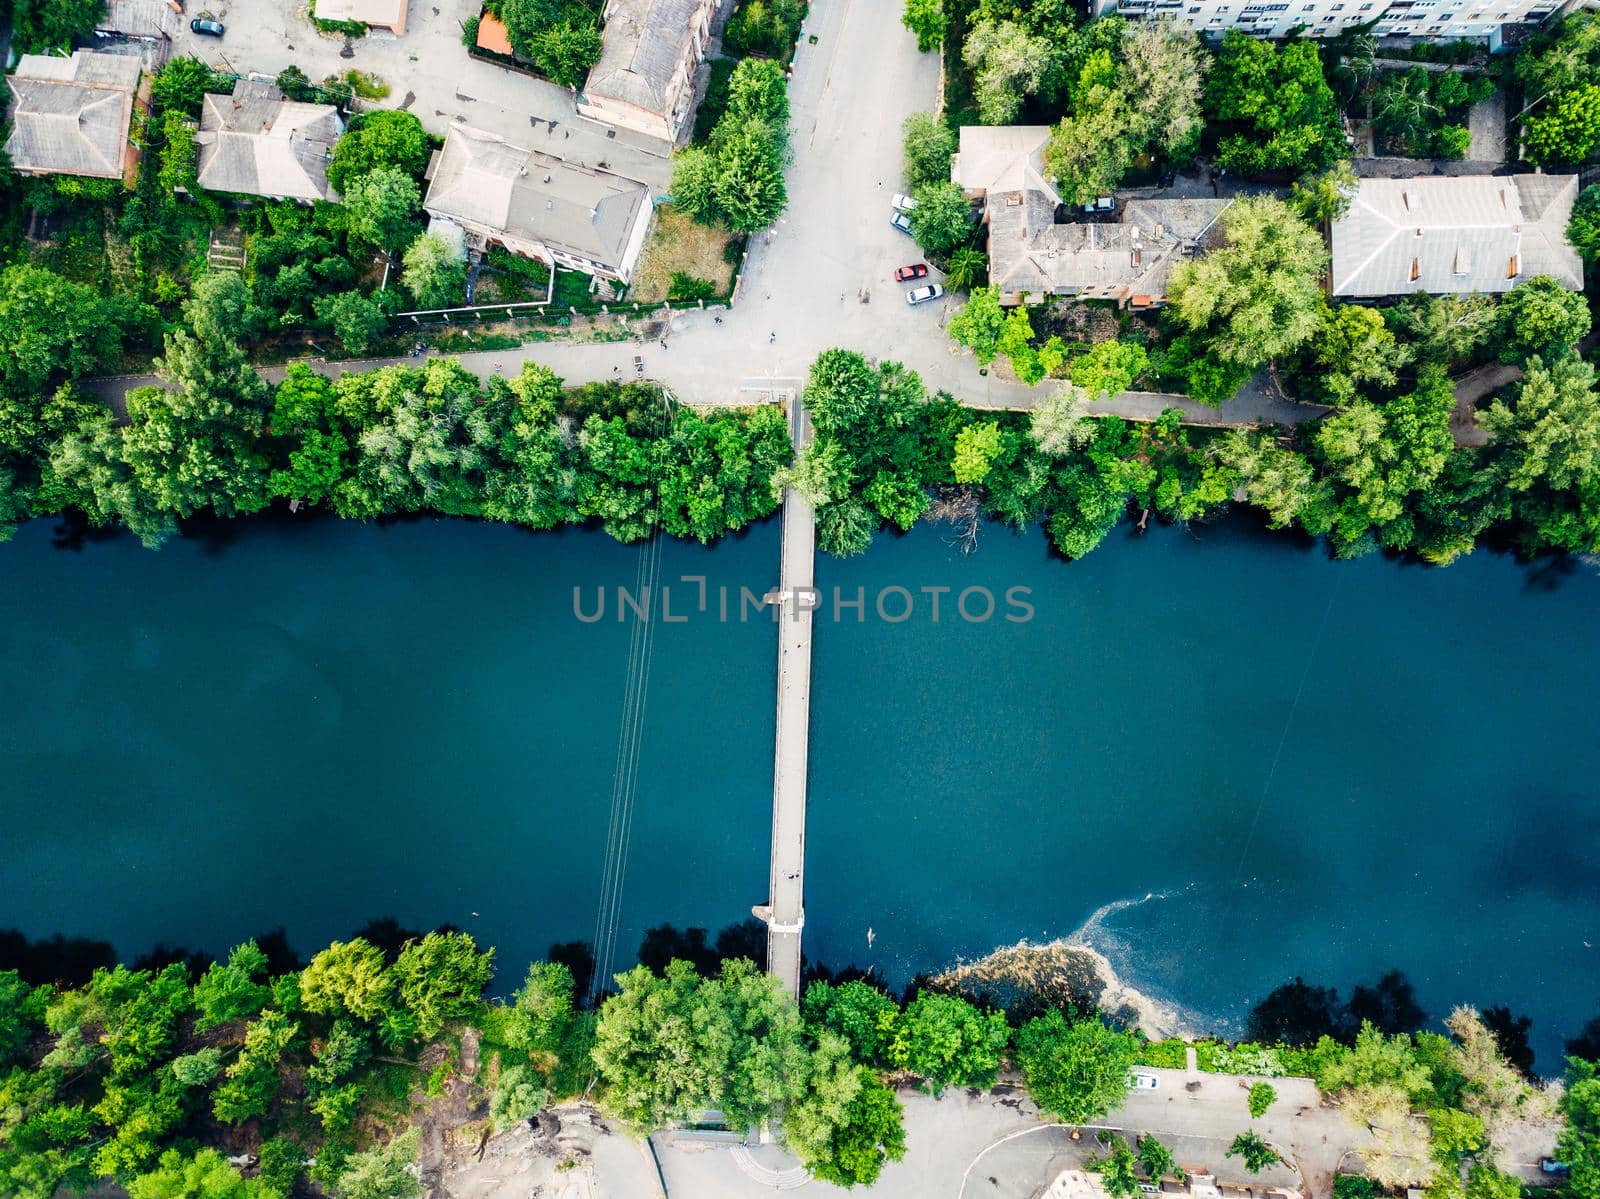 Aerial view of the old bridge over the river from the quadrocopter by mosfet_ua